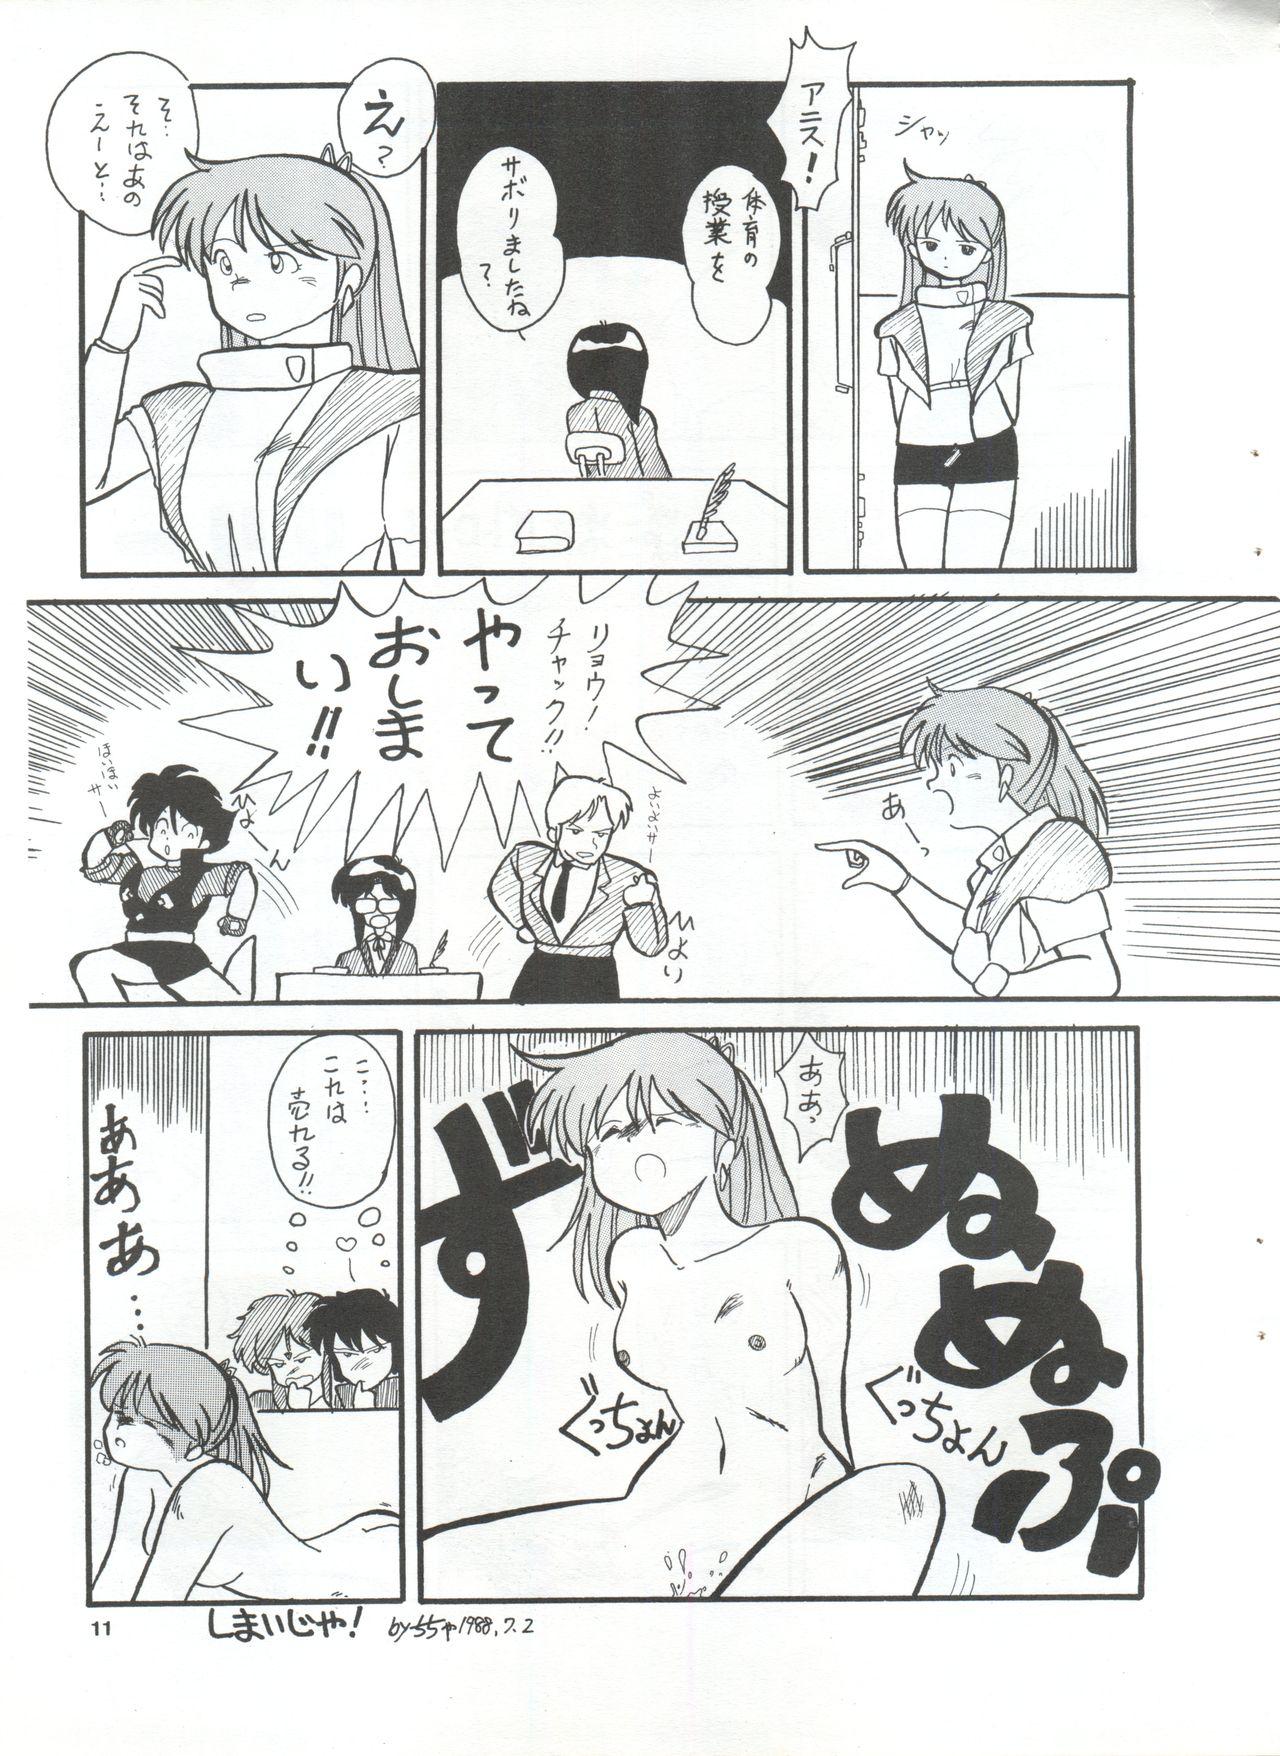 Hot Girls Getting Fucked YATTE! YATTE! Mission 1 - Dirty pair Sonic soldier borgman From - Page 10